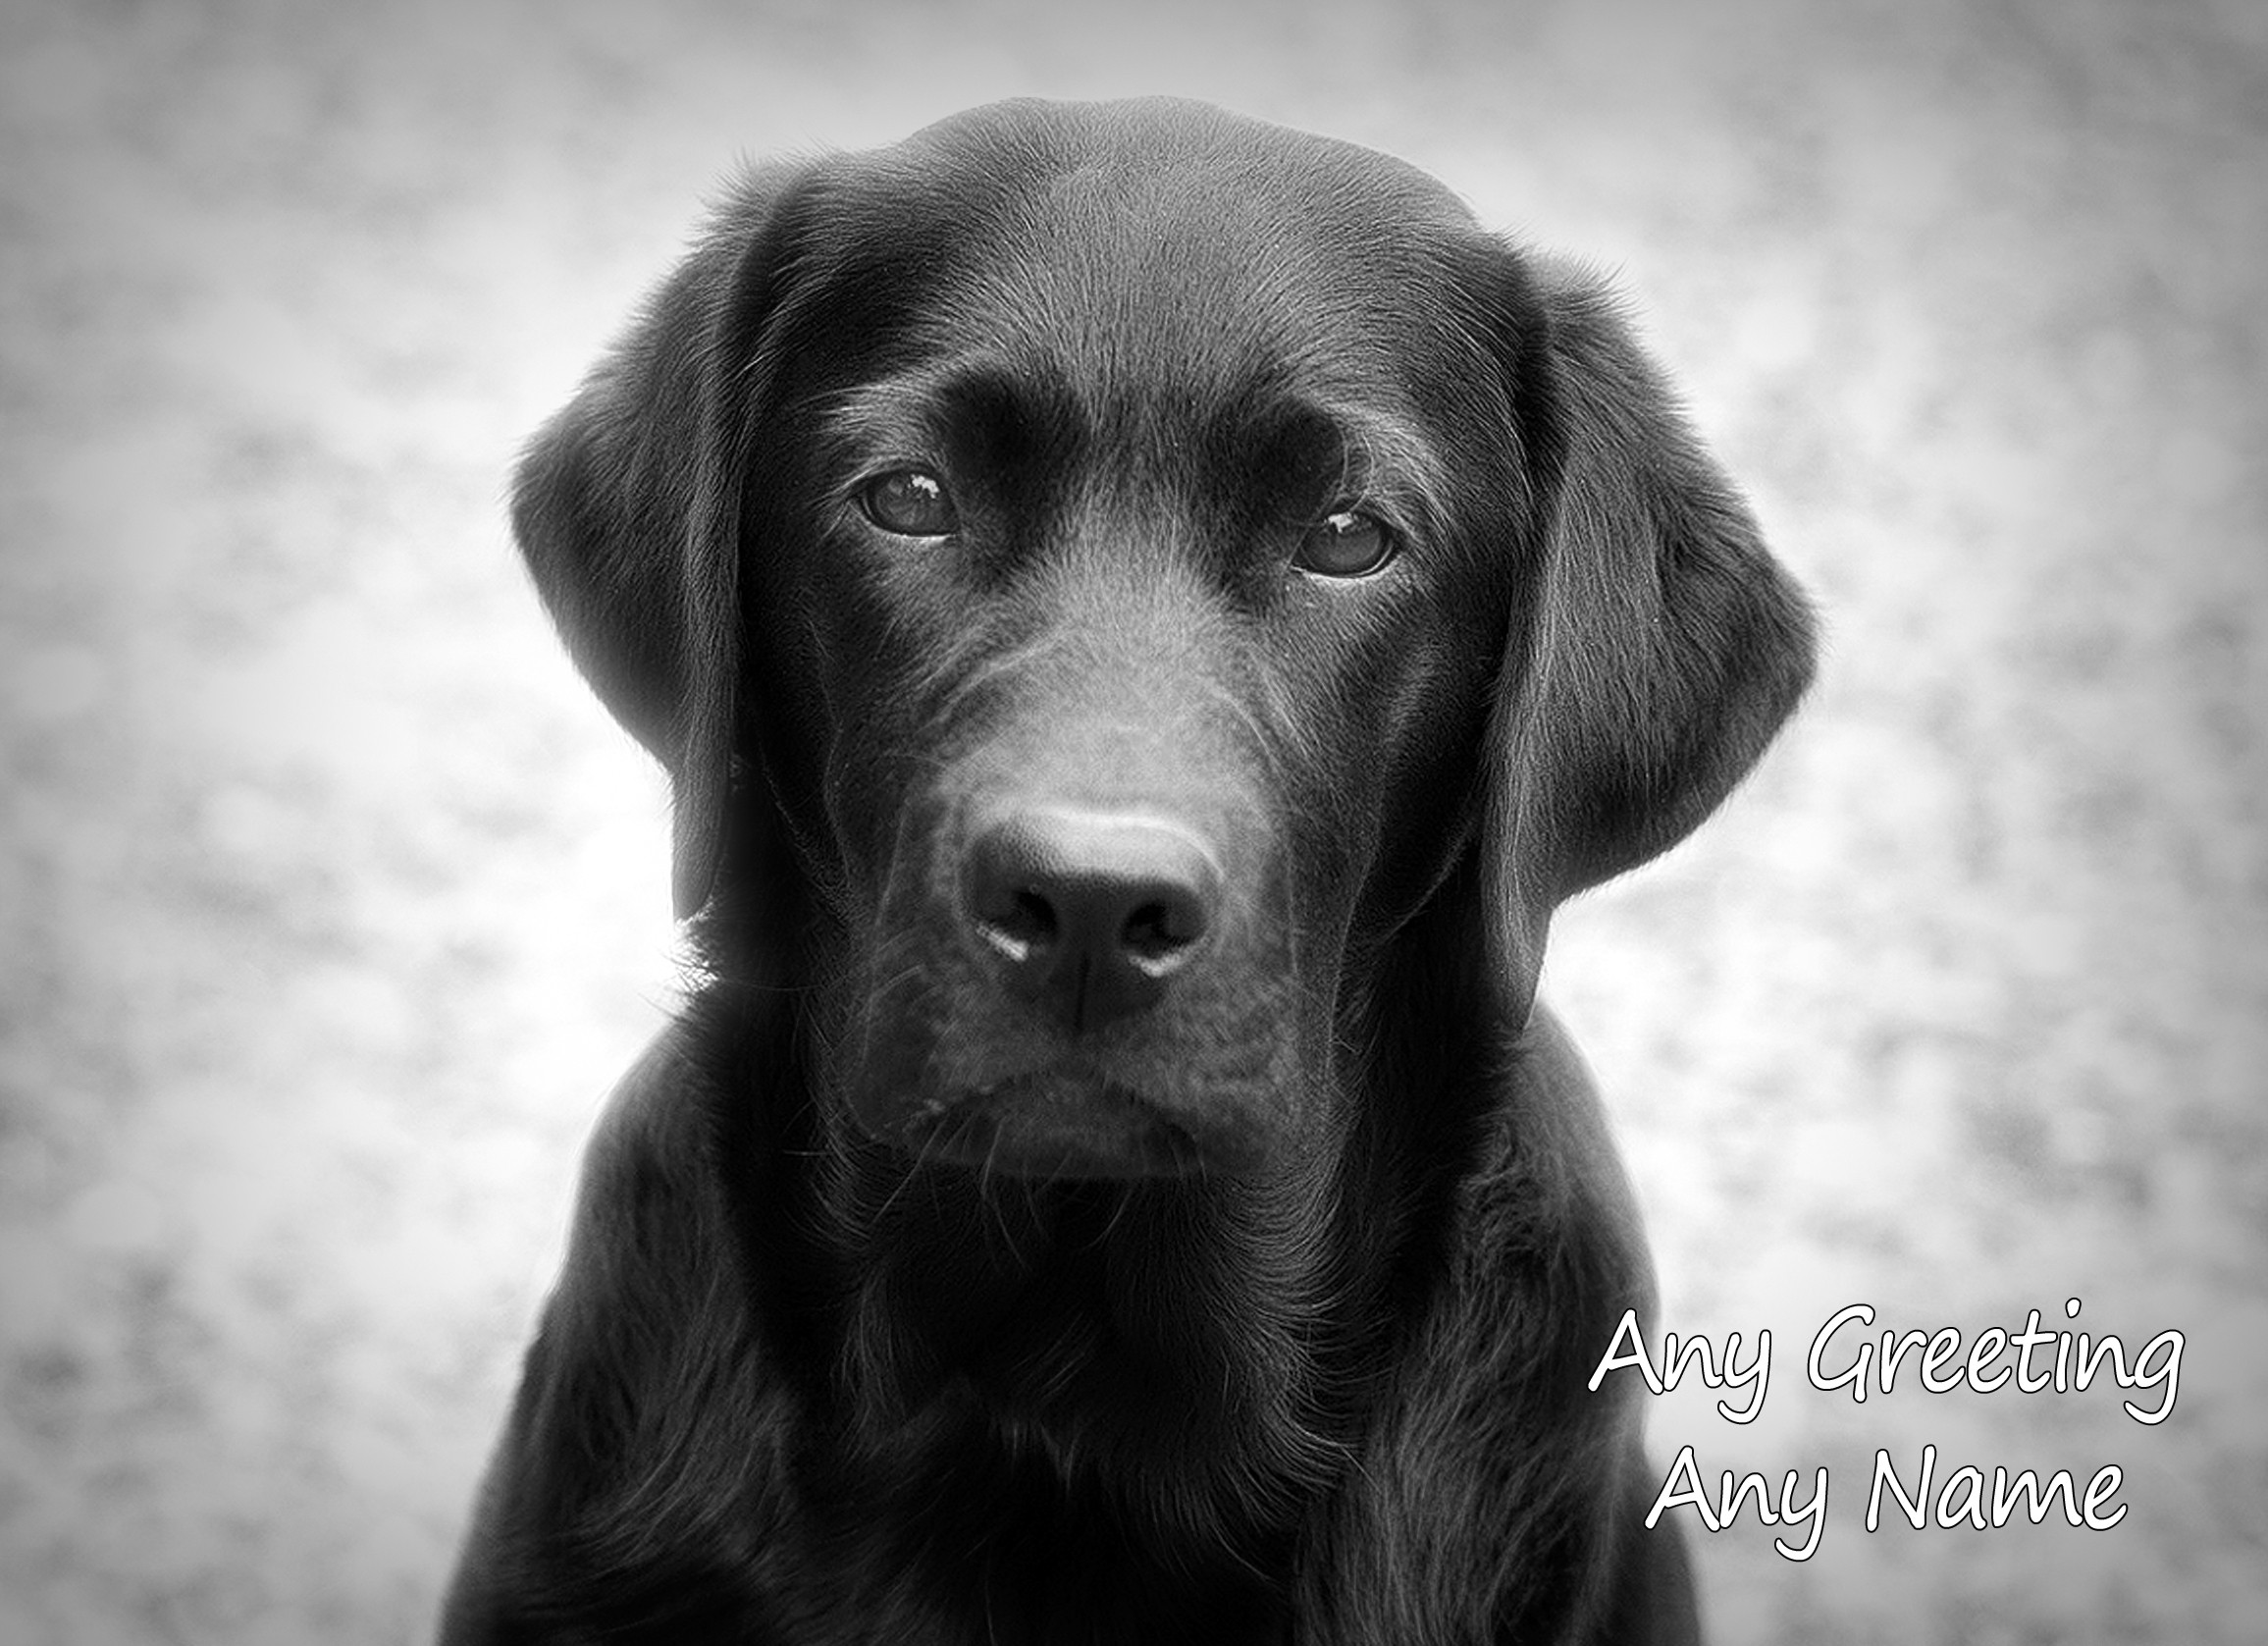 Personalised Black Labrador Black and White Greeting Card (Birthday, Christmas, Any Occasion)